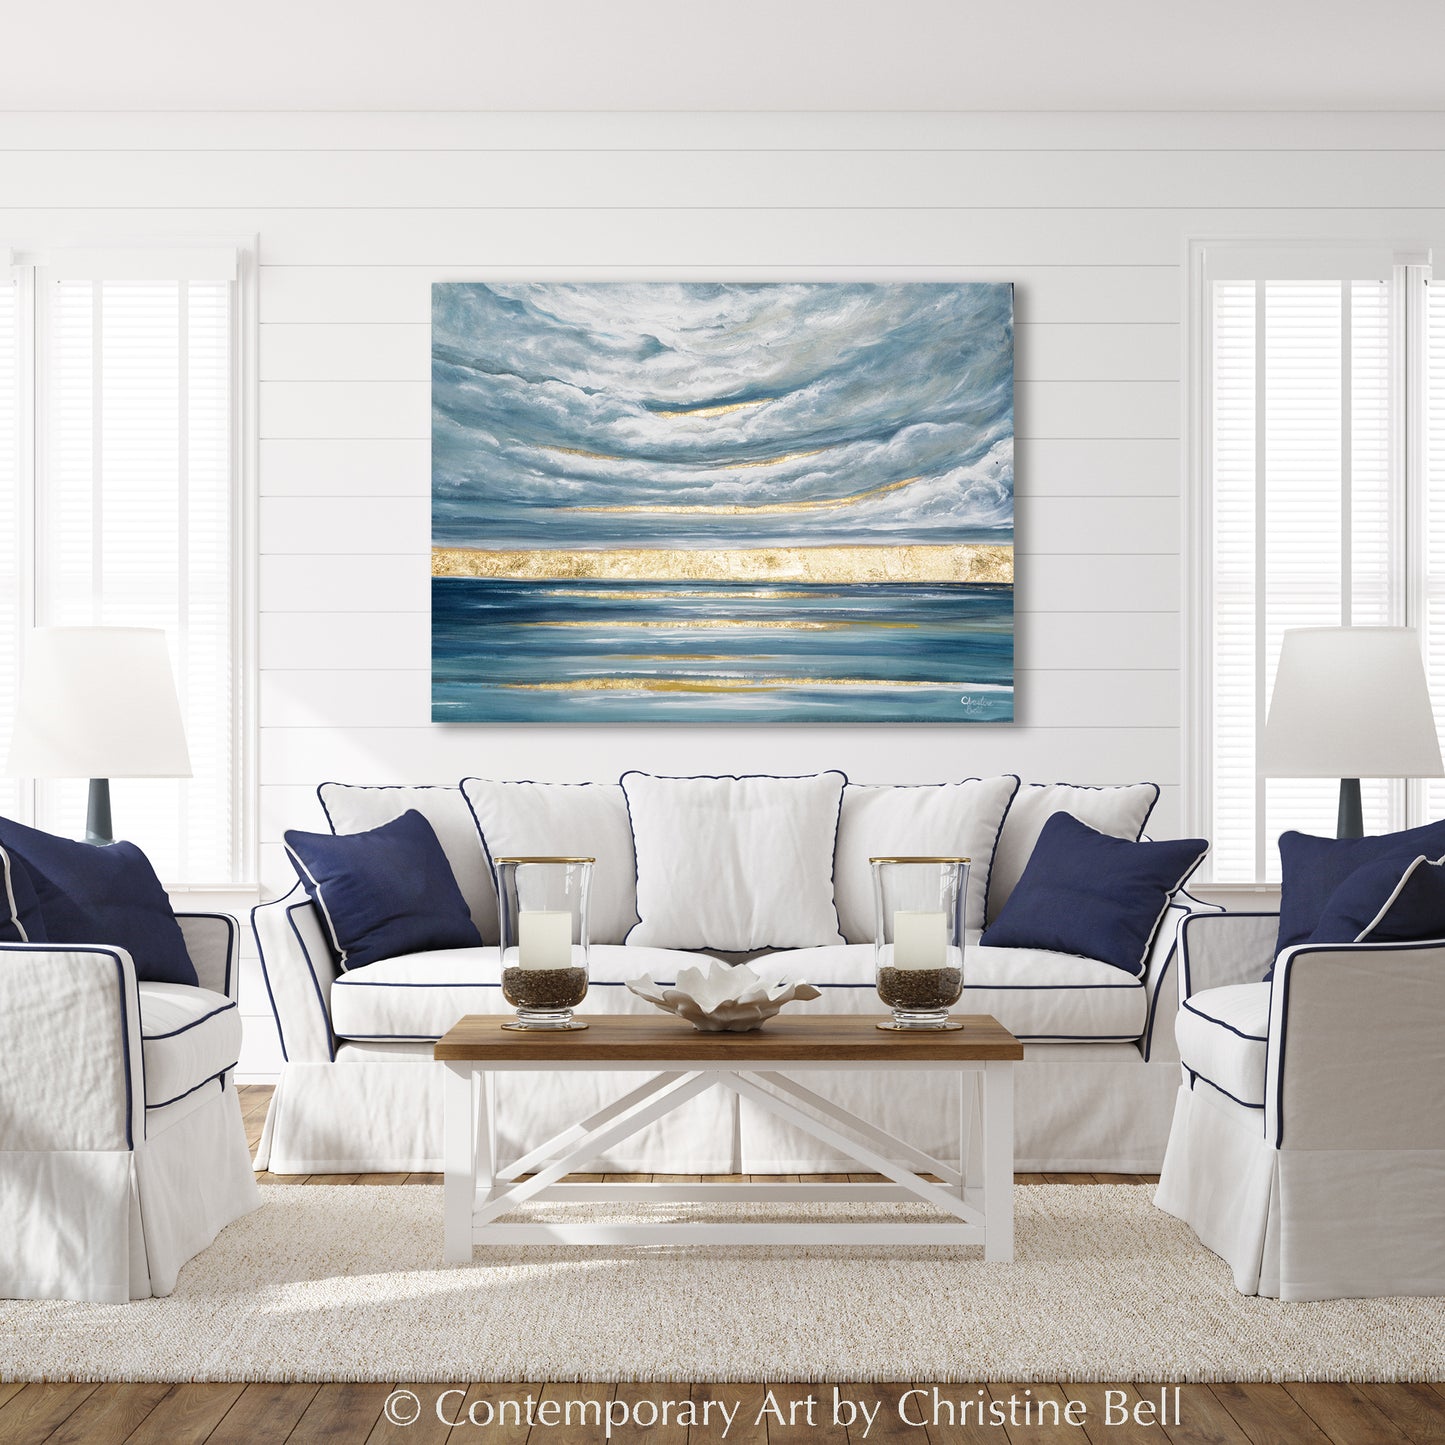 "Finding the Light" ORIGINAL PAINTING, Modern Impressionist Seascape with Gold Leaf